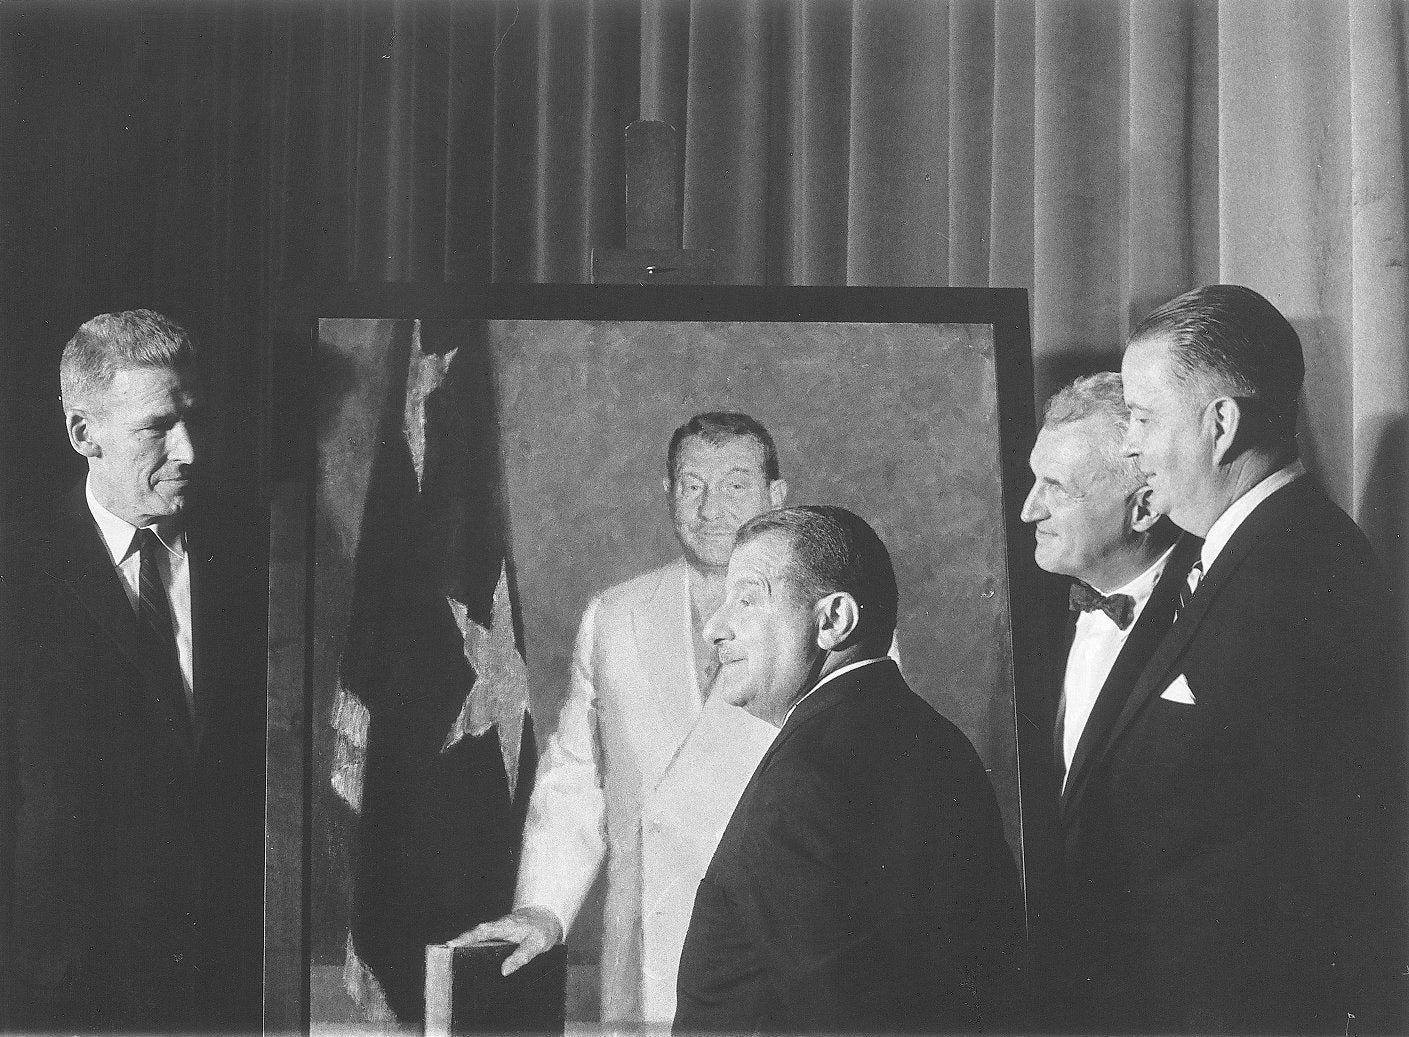 I.S. Ravdin at the unveiling of his portrait, 1958